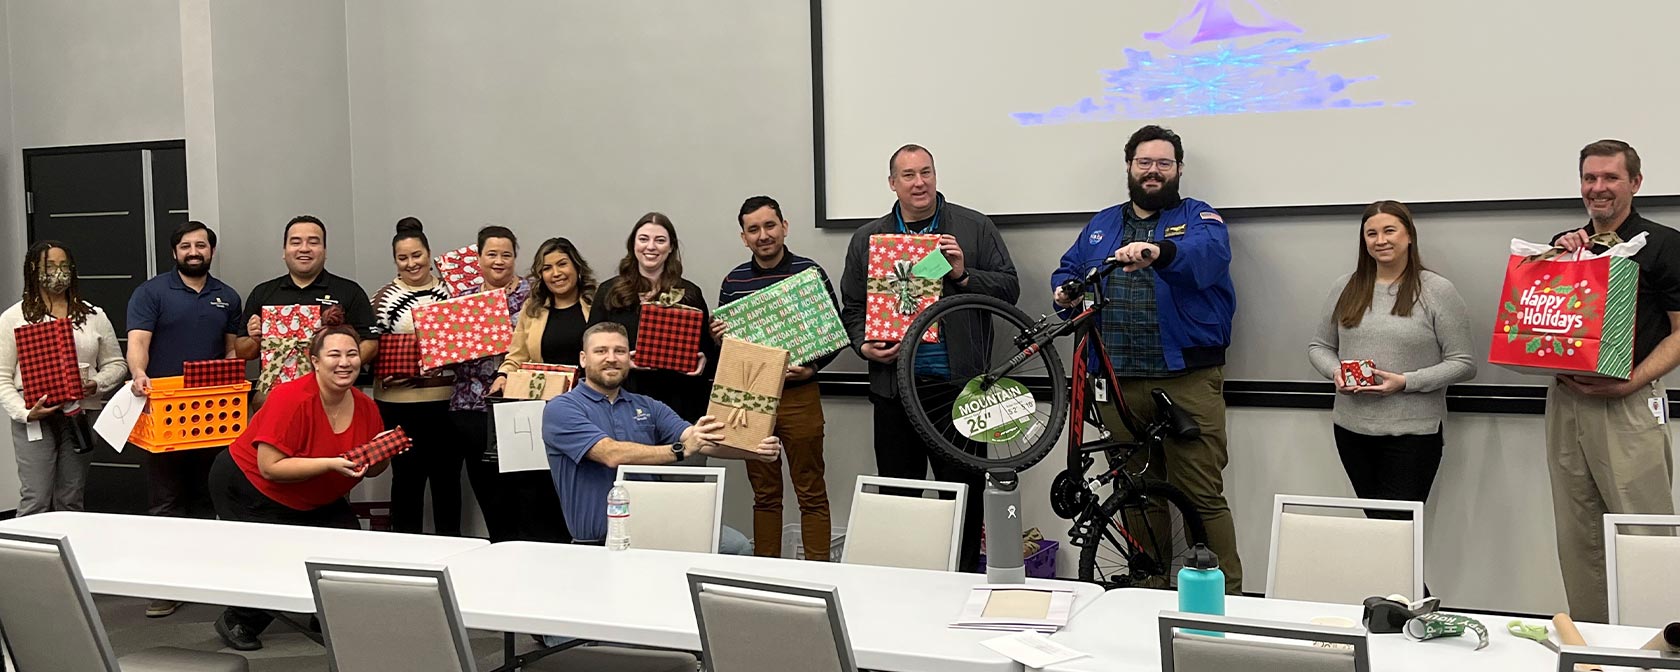 Touro Nevada employees gathered to wrap the holiday gifts for this years toy drive.